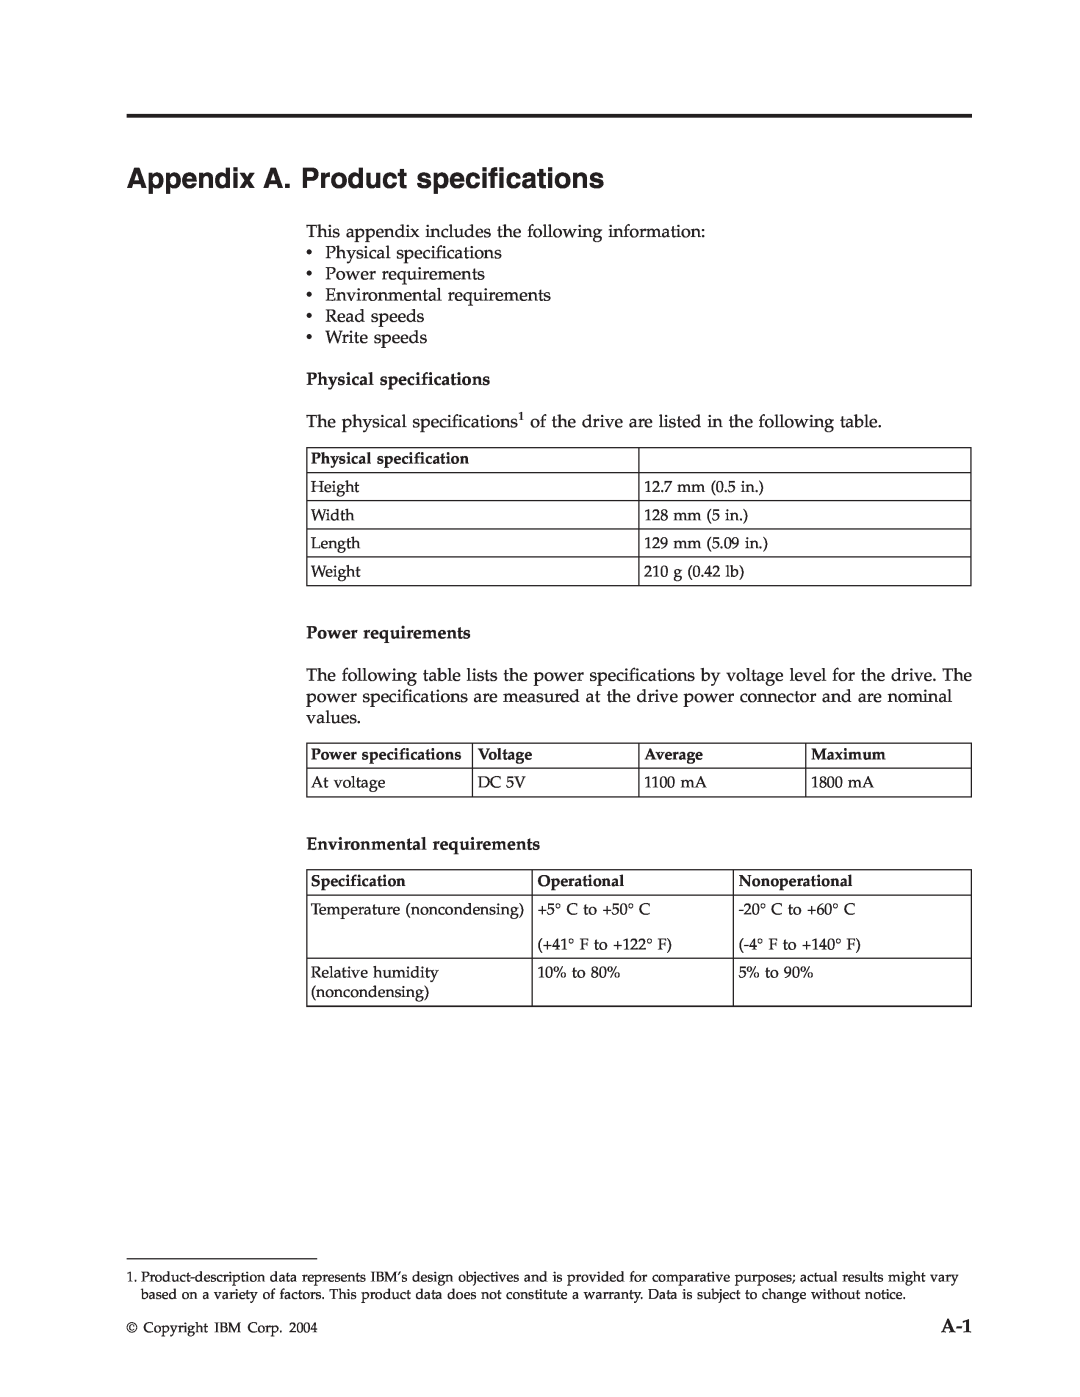 IBM 73P3315 Appendix A. Product specifications, Physical specifications, Power requirements, Environmental requirements 